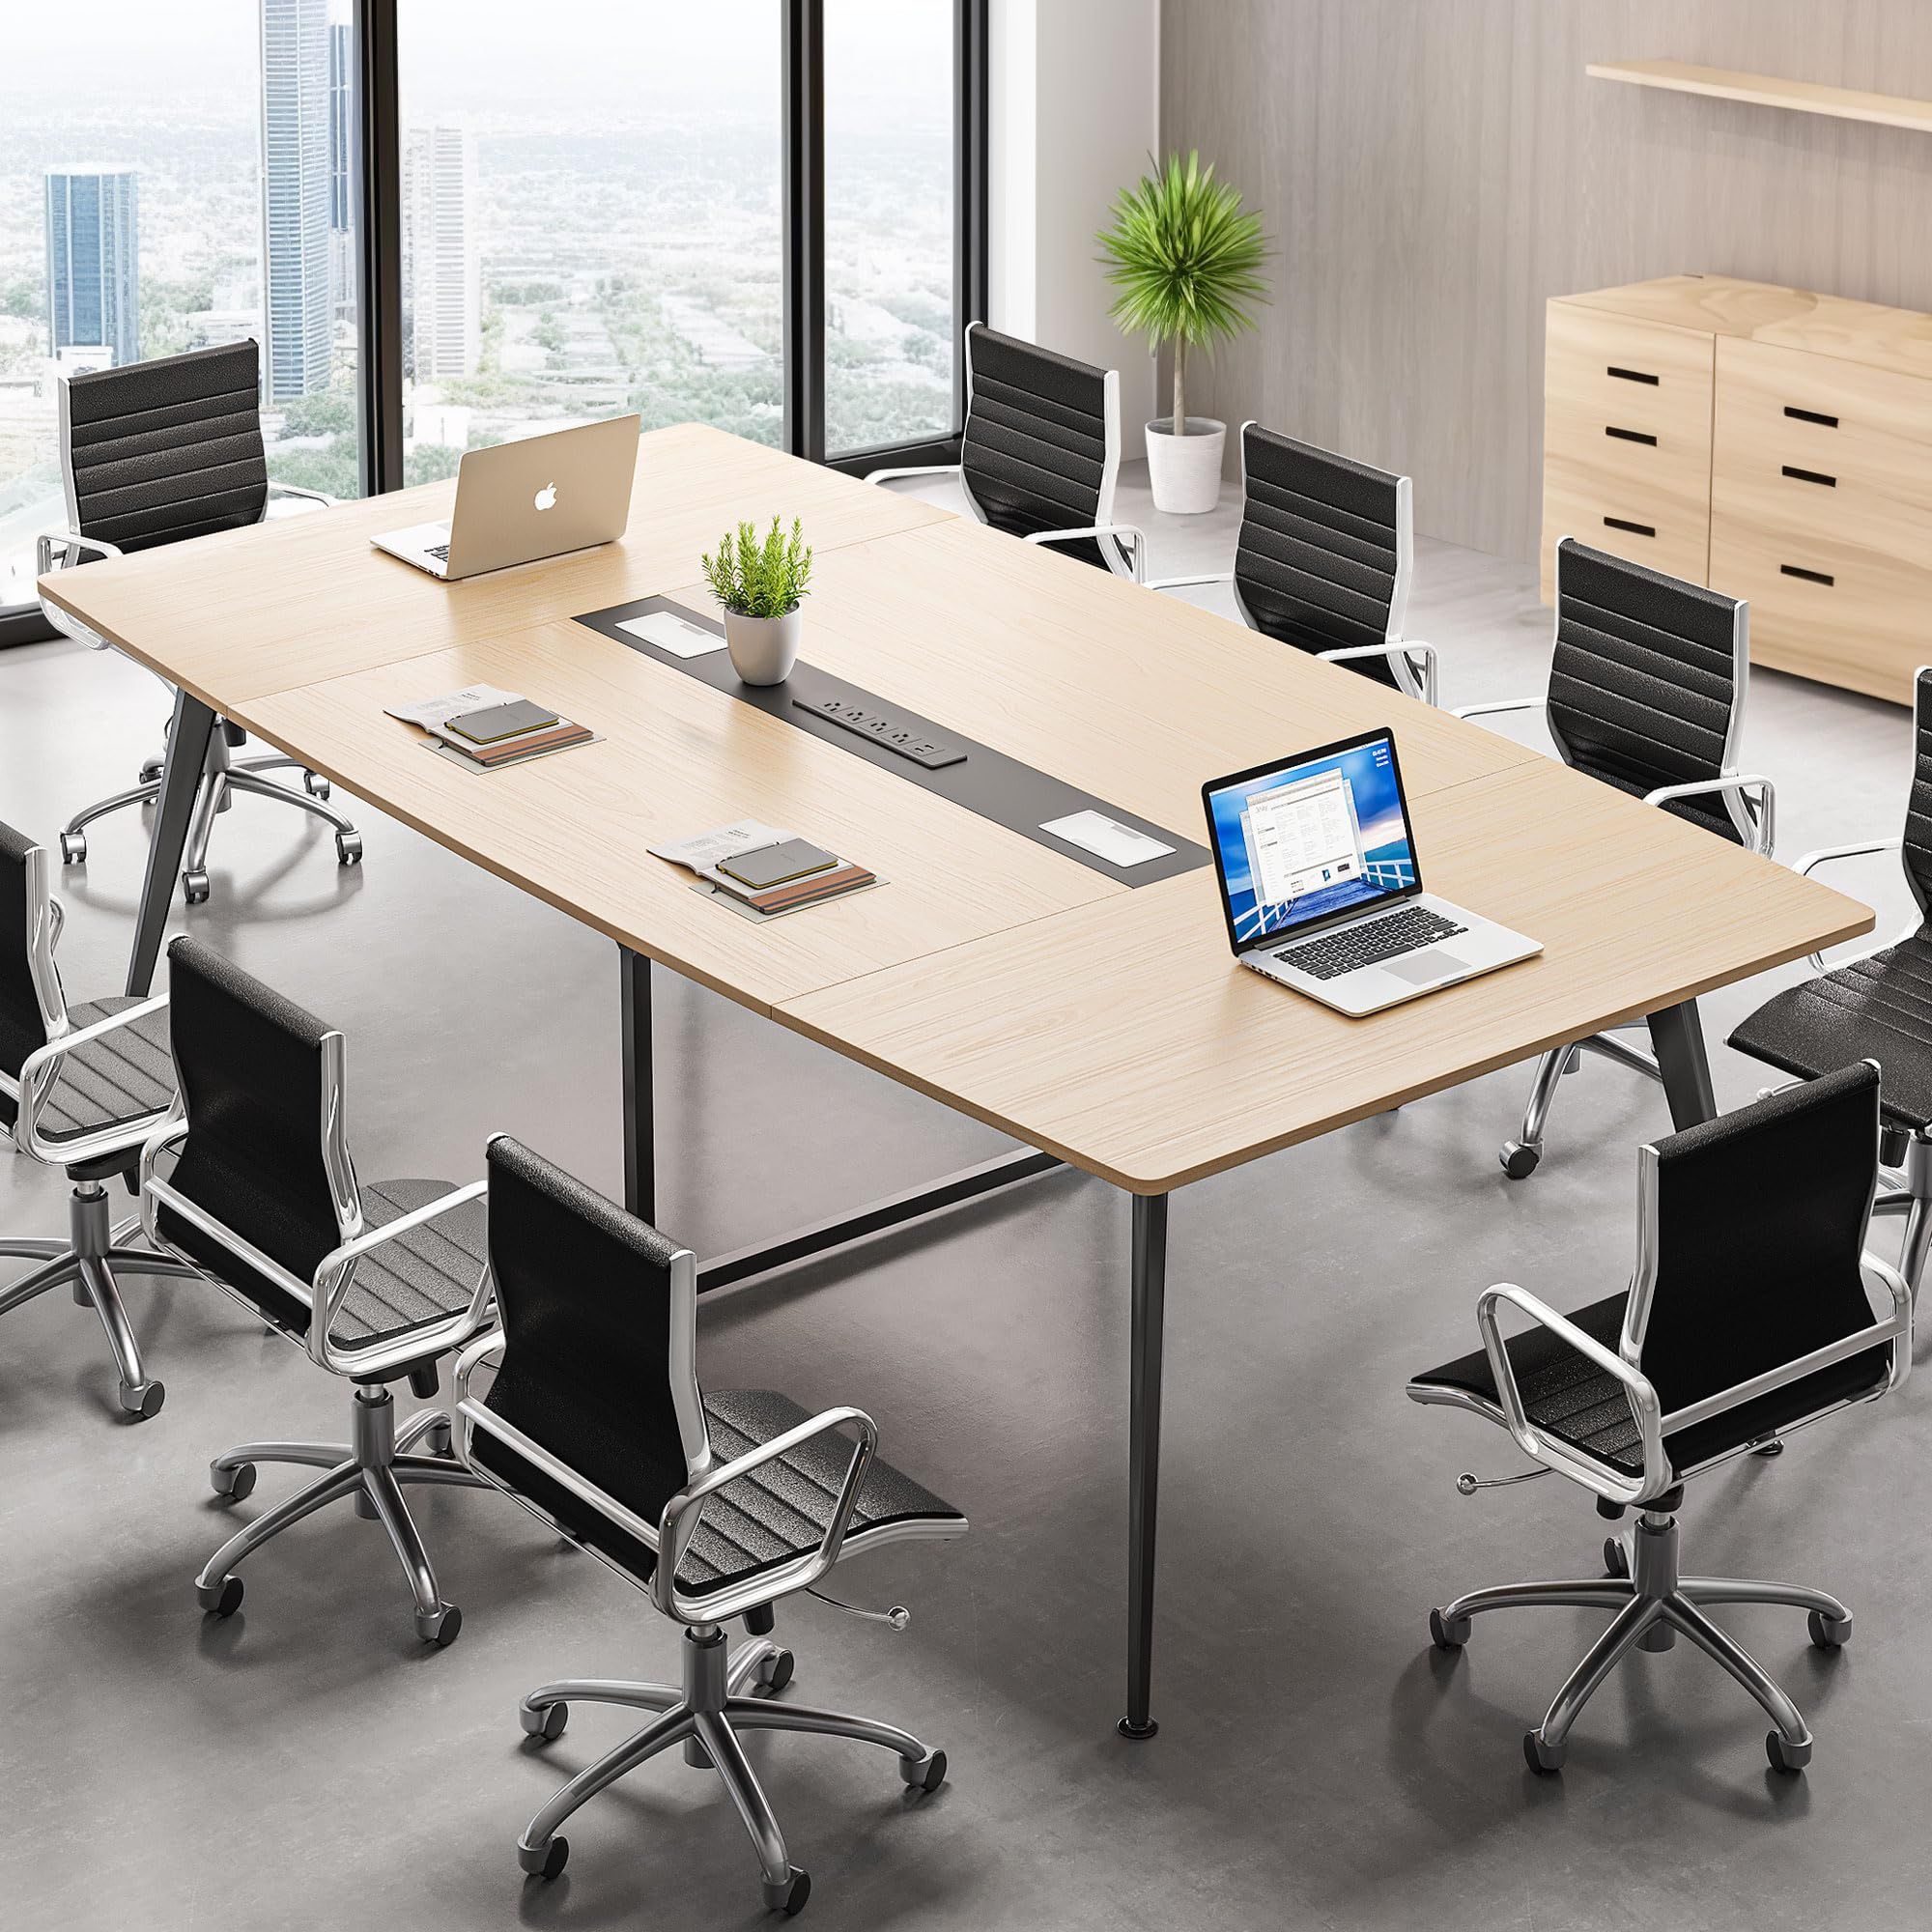 8FT Conference Table with Power Outlets, 94.5 Inches Boat Shaped Meeting Table with Rectangle Grommet